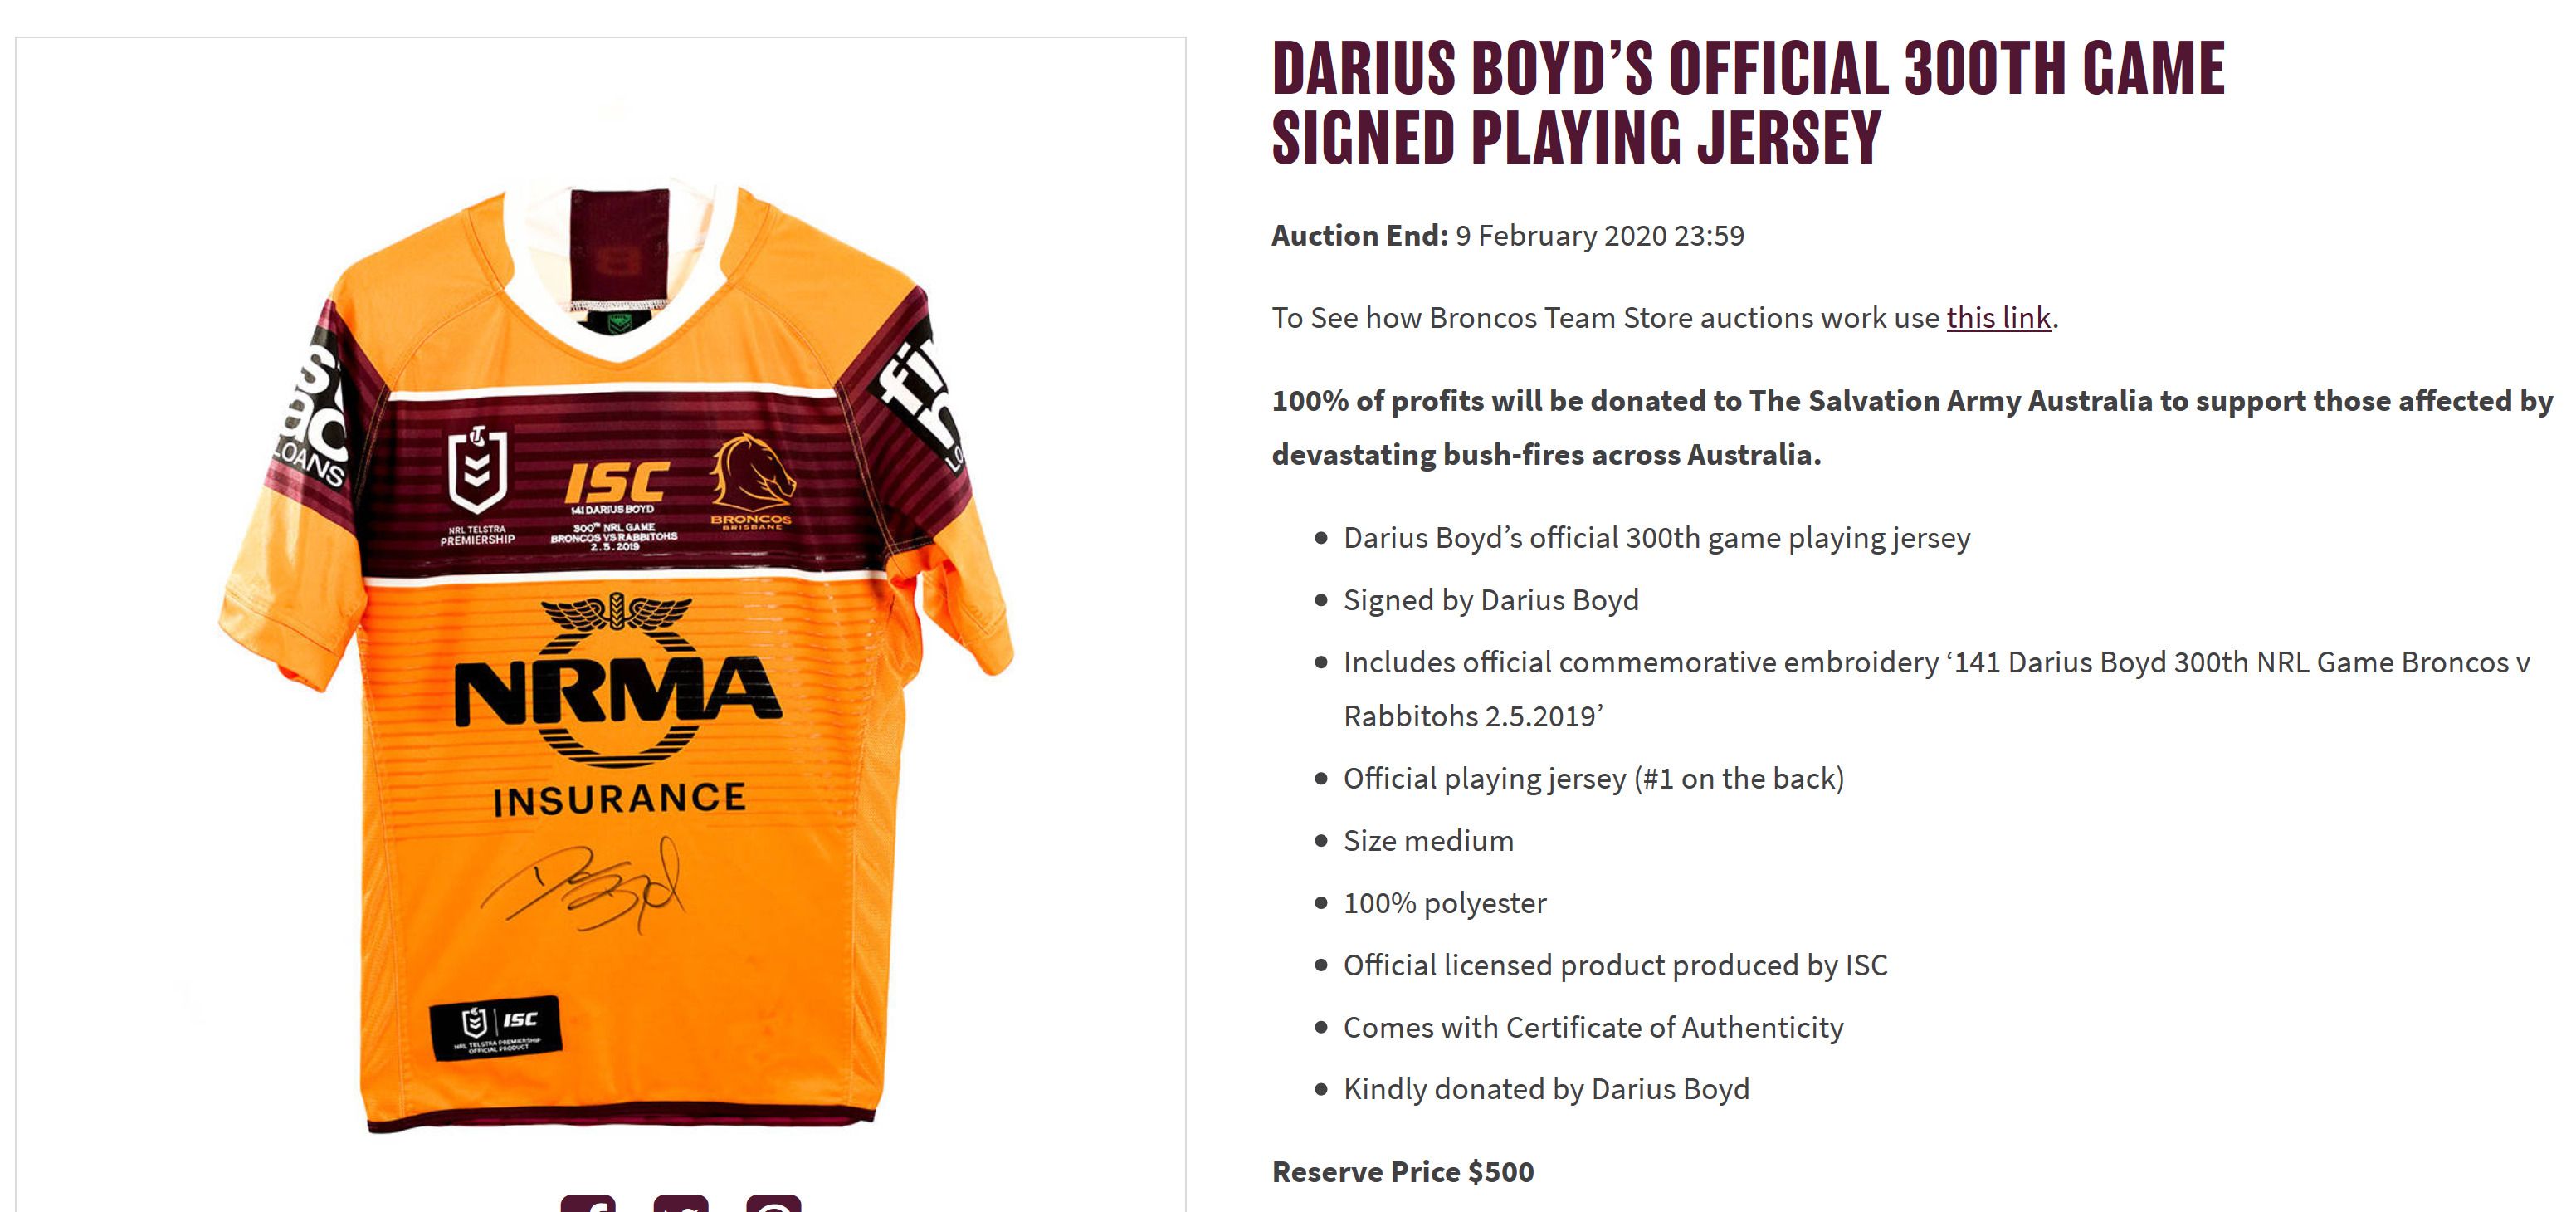 Screenshot 2020 01 24 Darius Boyds official 300th game signed playing jersey